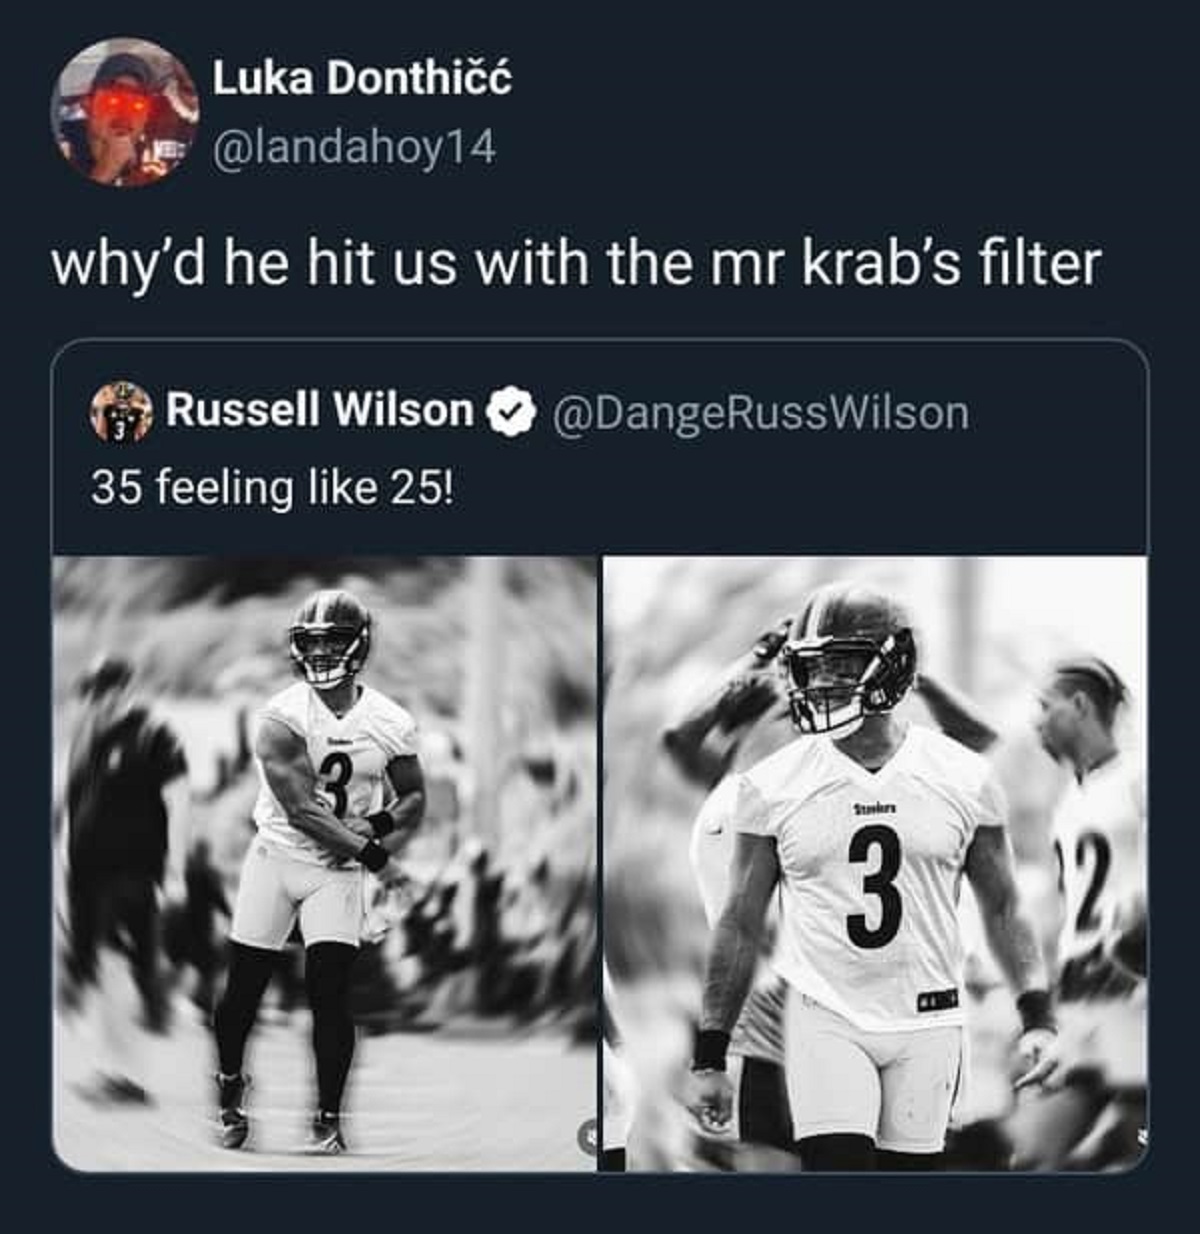 American football - Luka Donthi why'd he hit us with the mr krab's filter Russell Wilson 35 feeling 25! Stakers 31 12